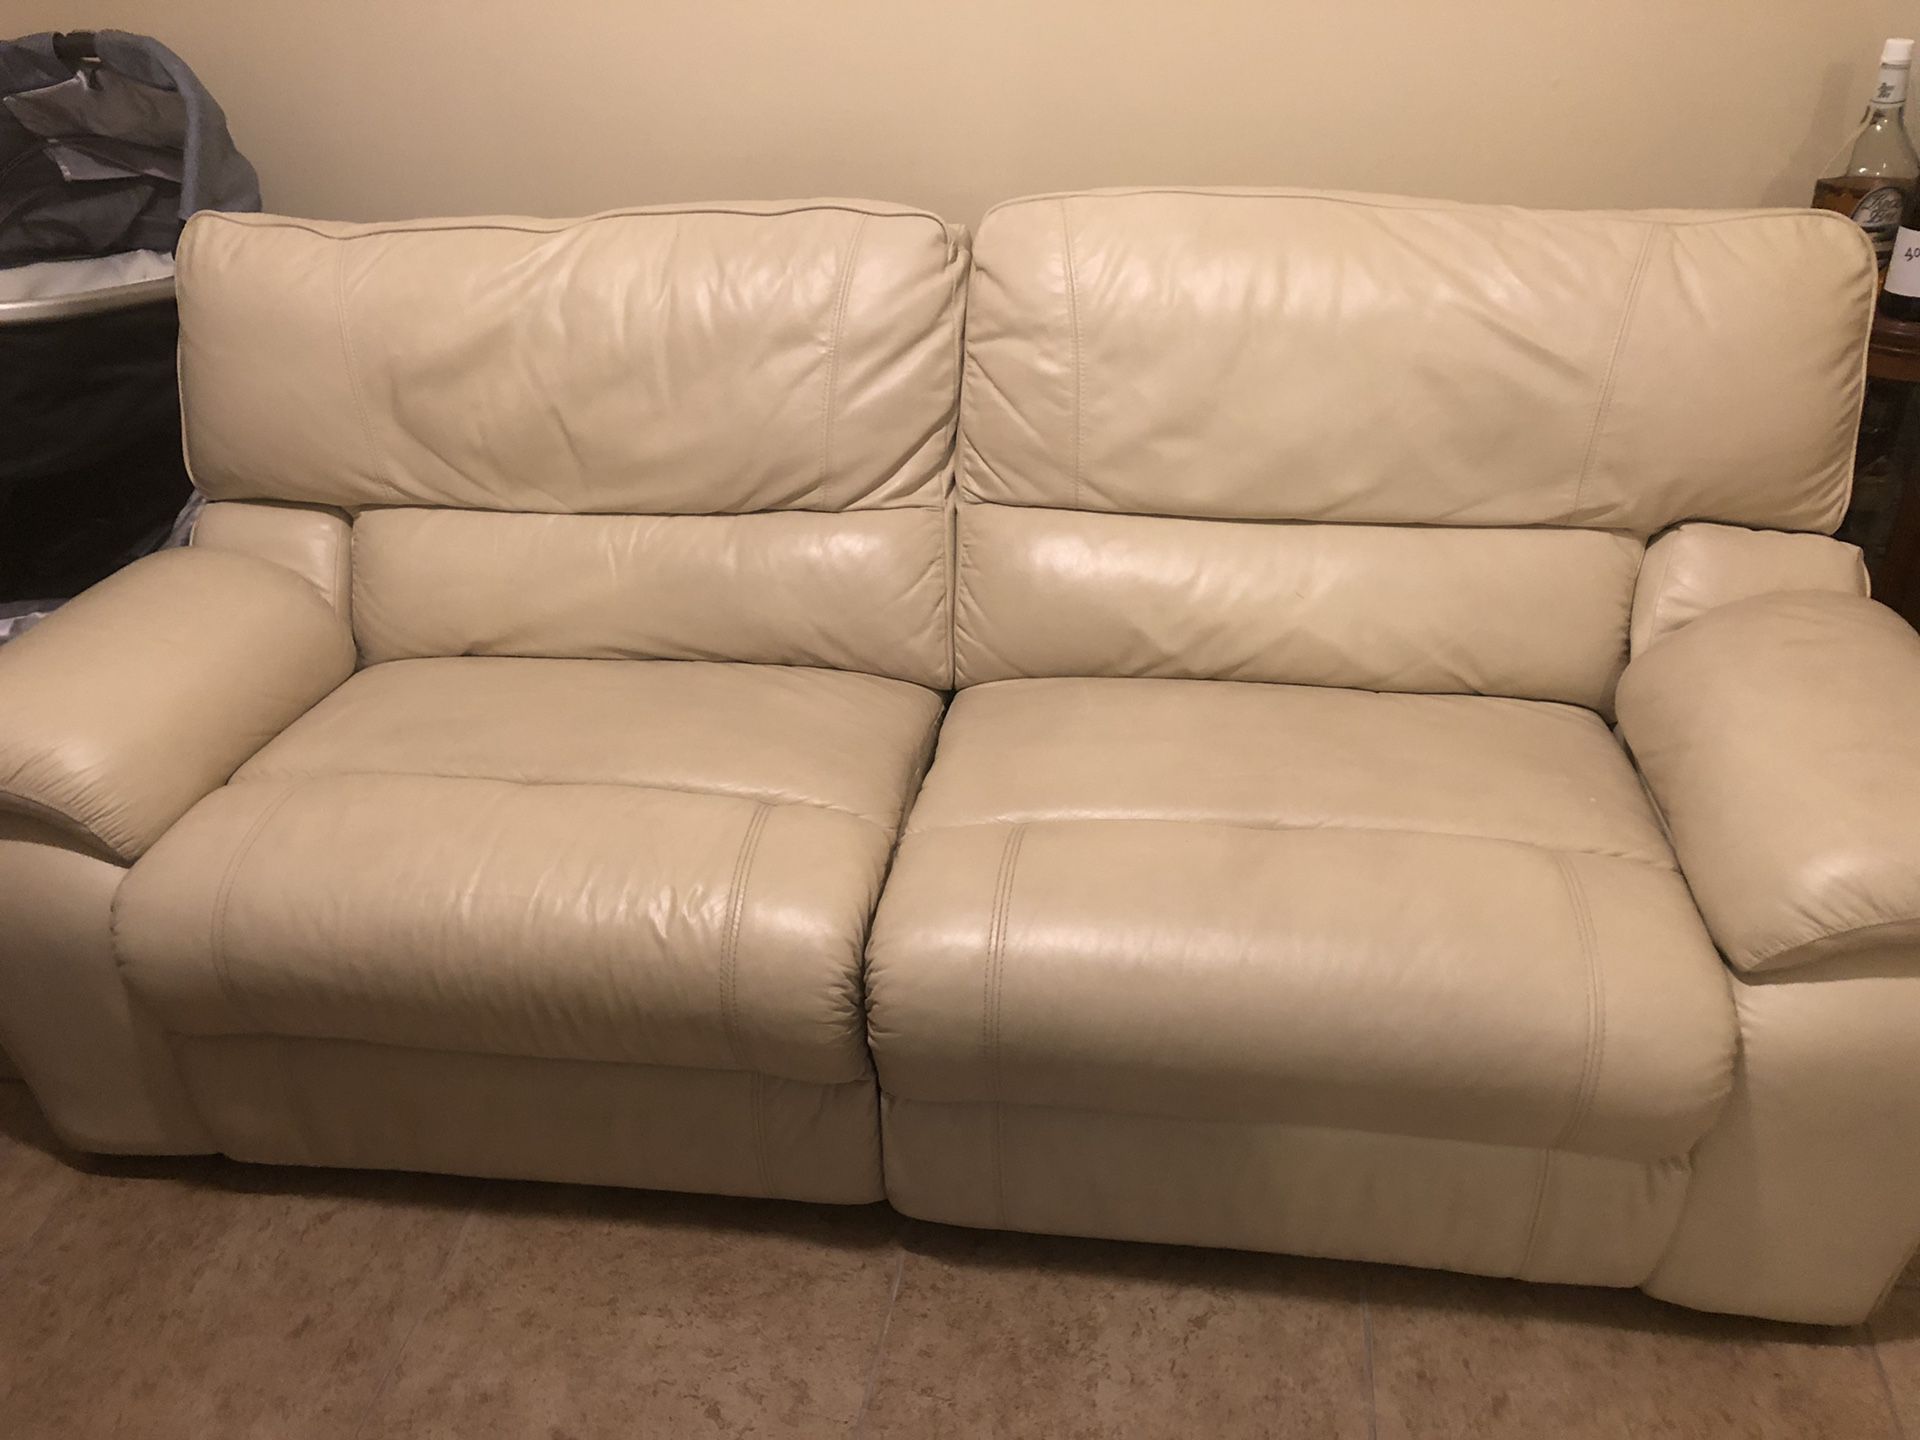 Reclining couch creme leather